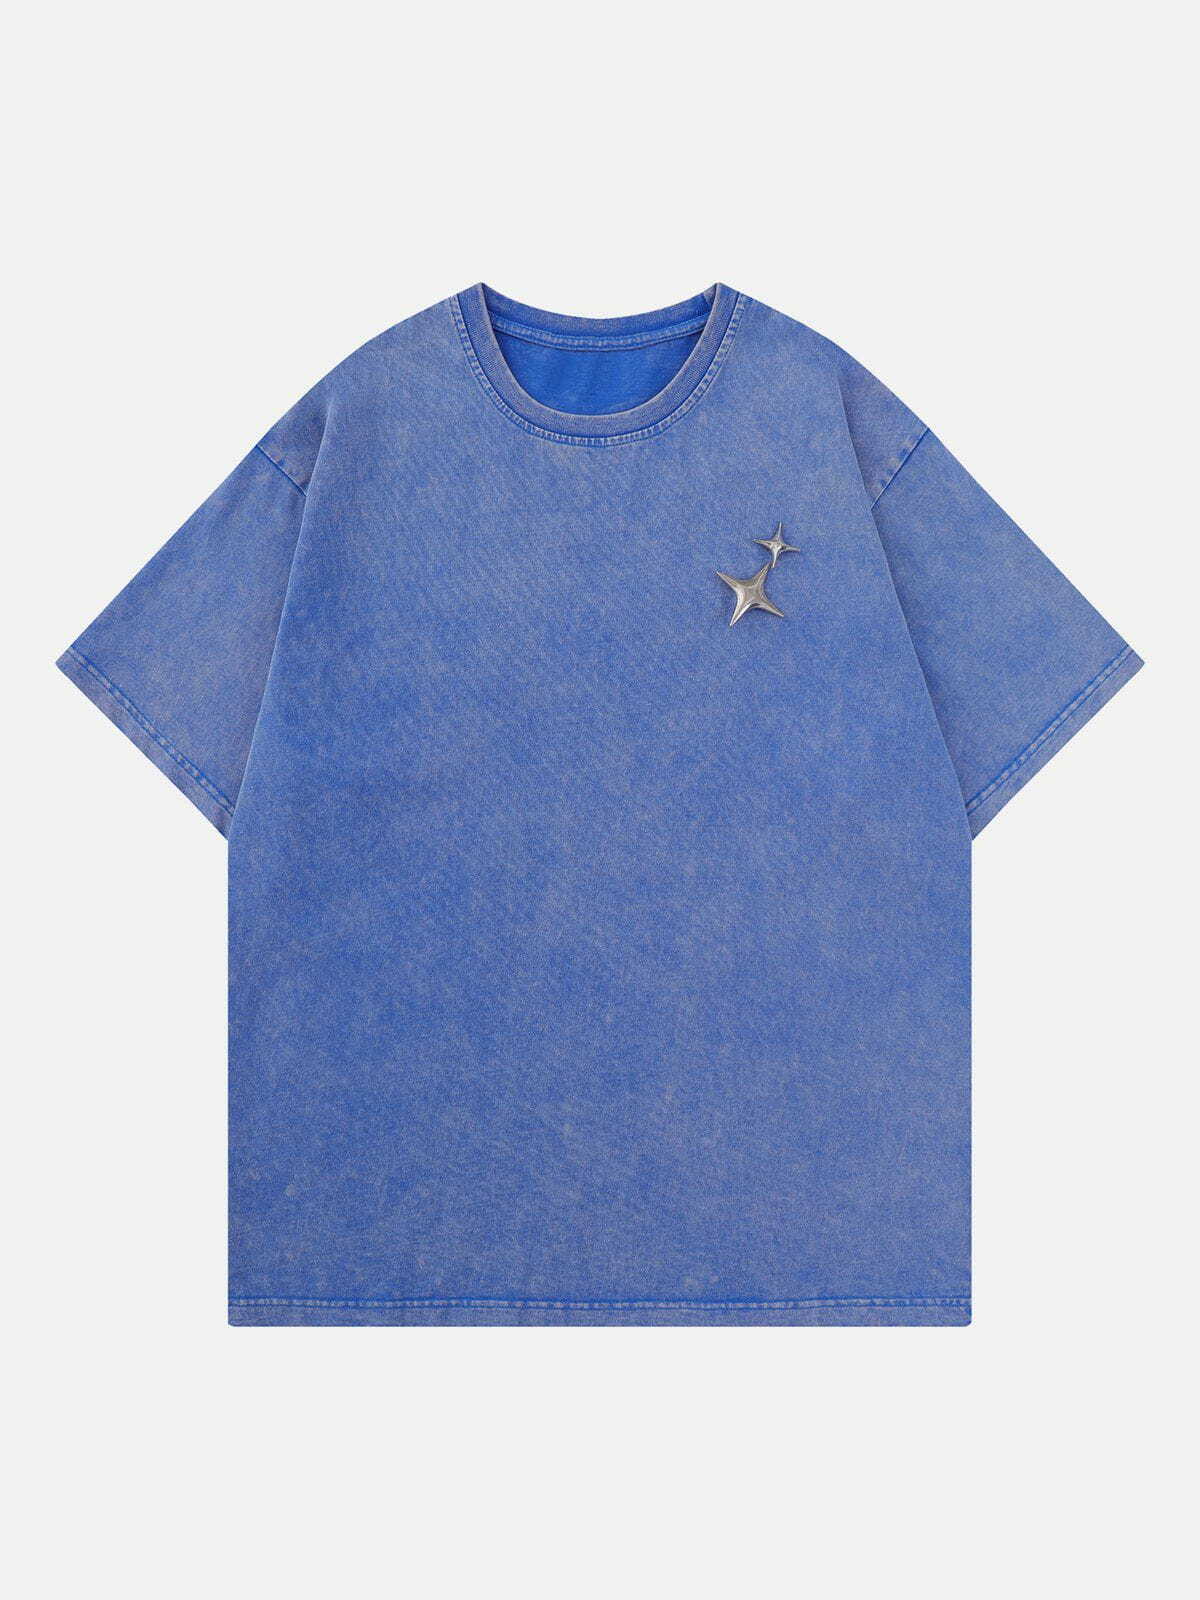 star print washed tee quirky cosmic streetwear 6556